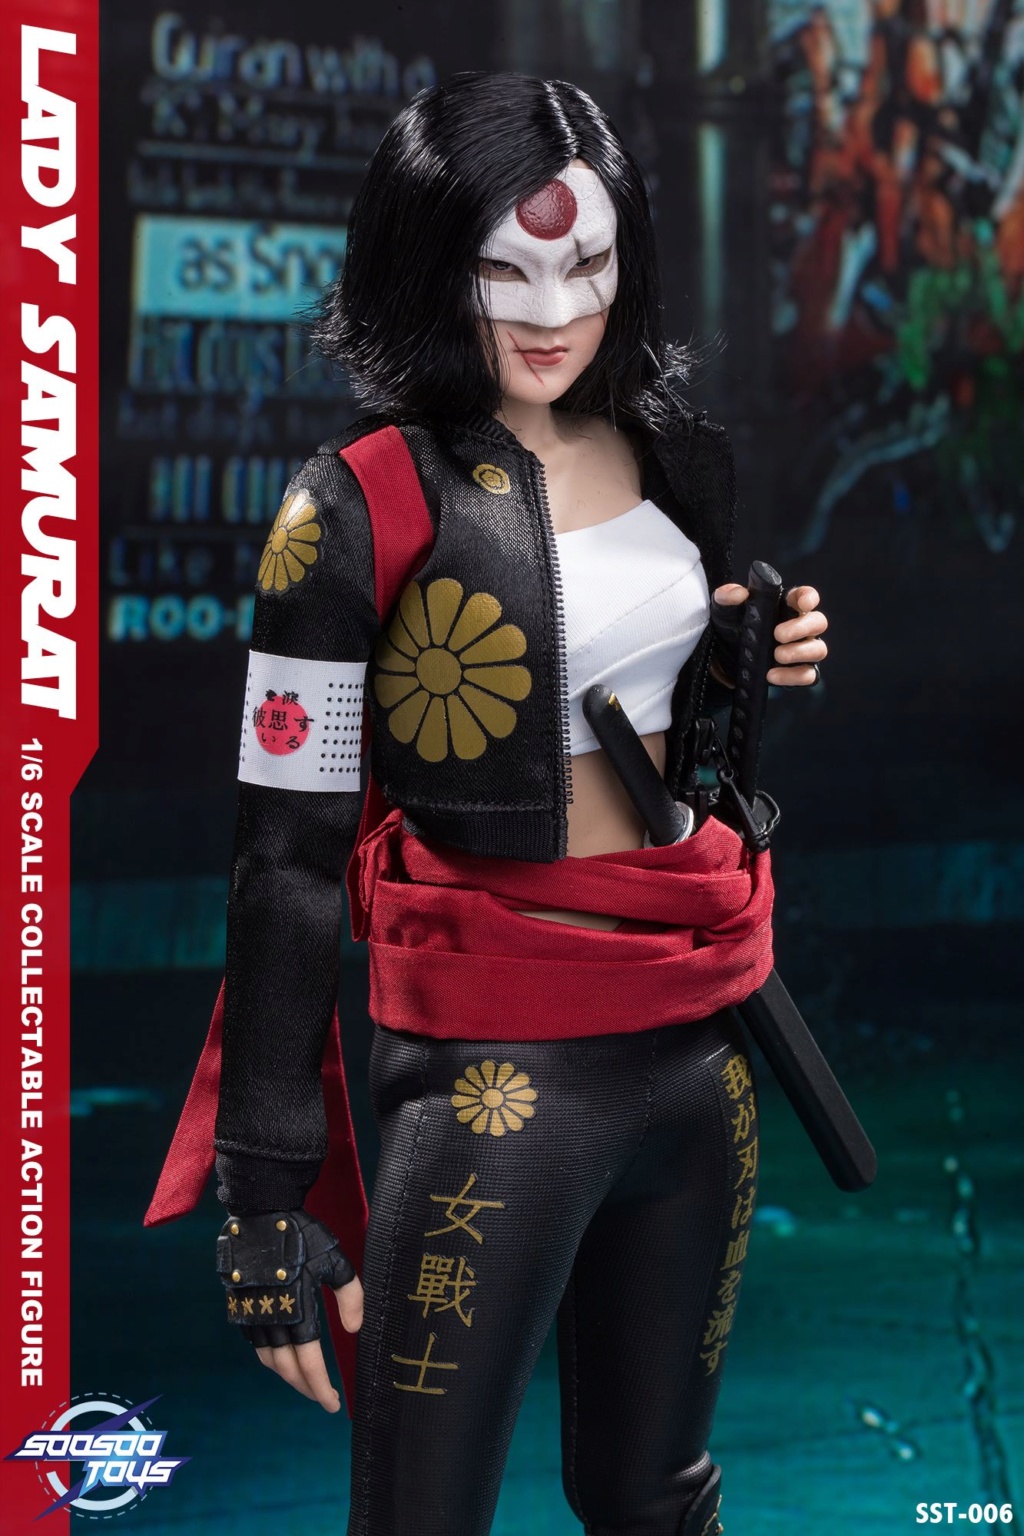 Suicide - NEW PRODUCT: Soosootoys 1/6 scale collectible SST-006 Lady Samurai 2198